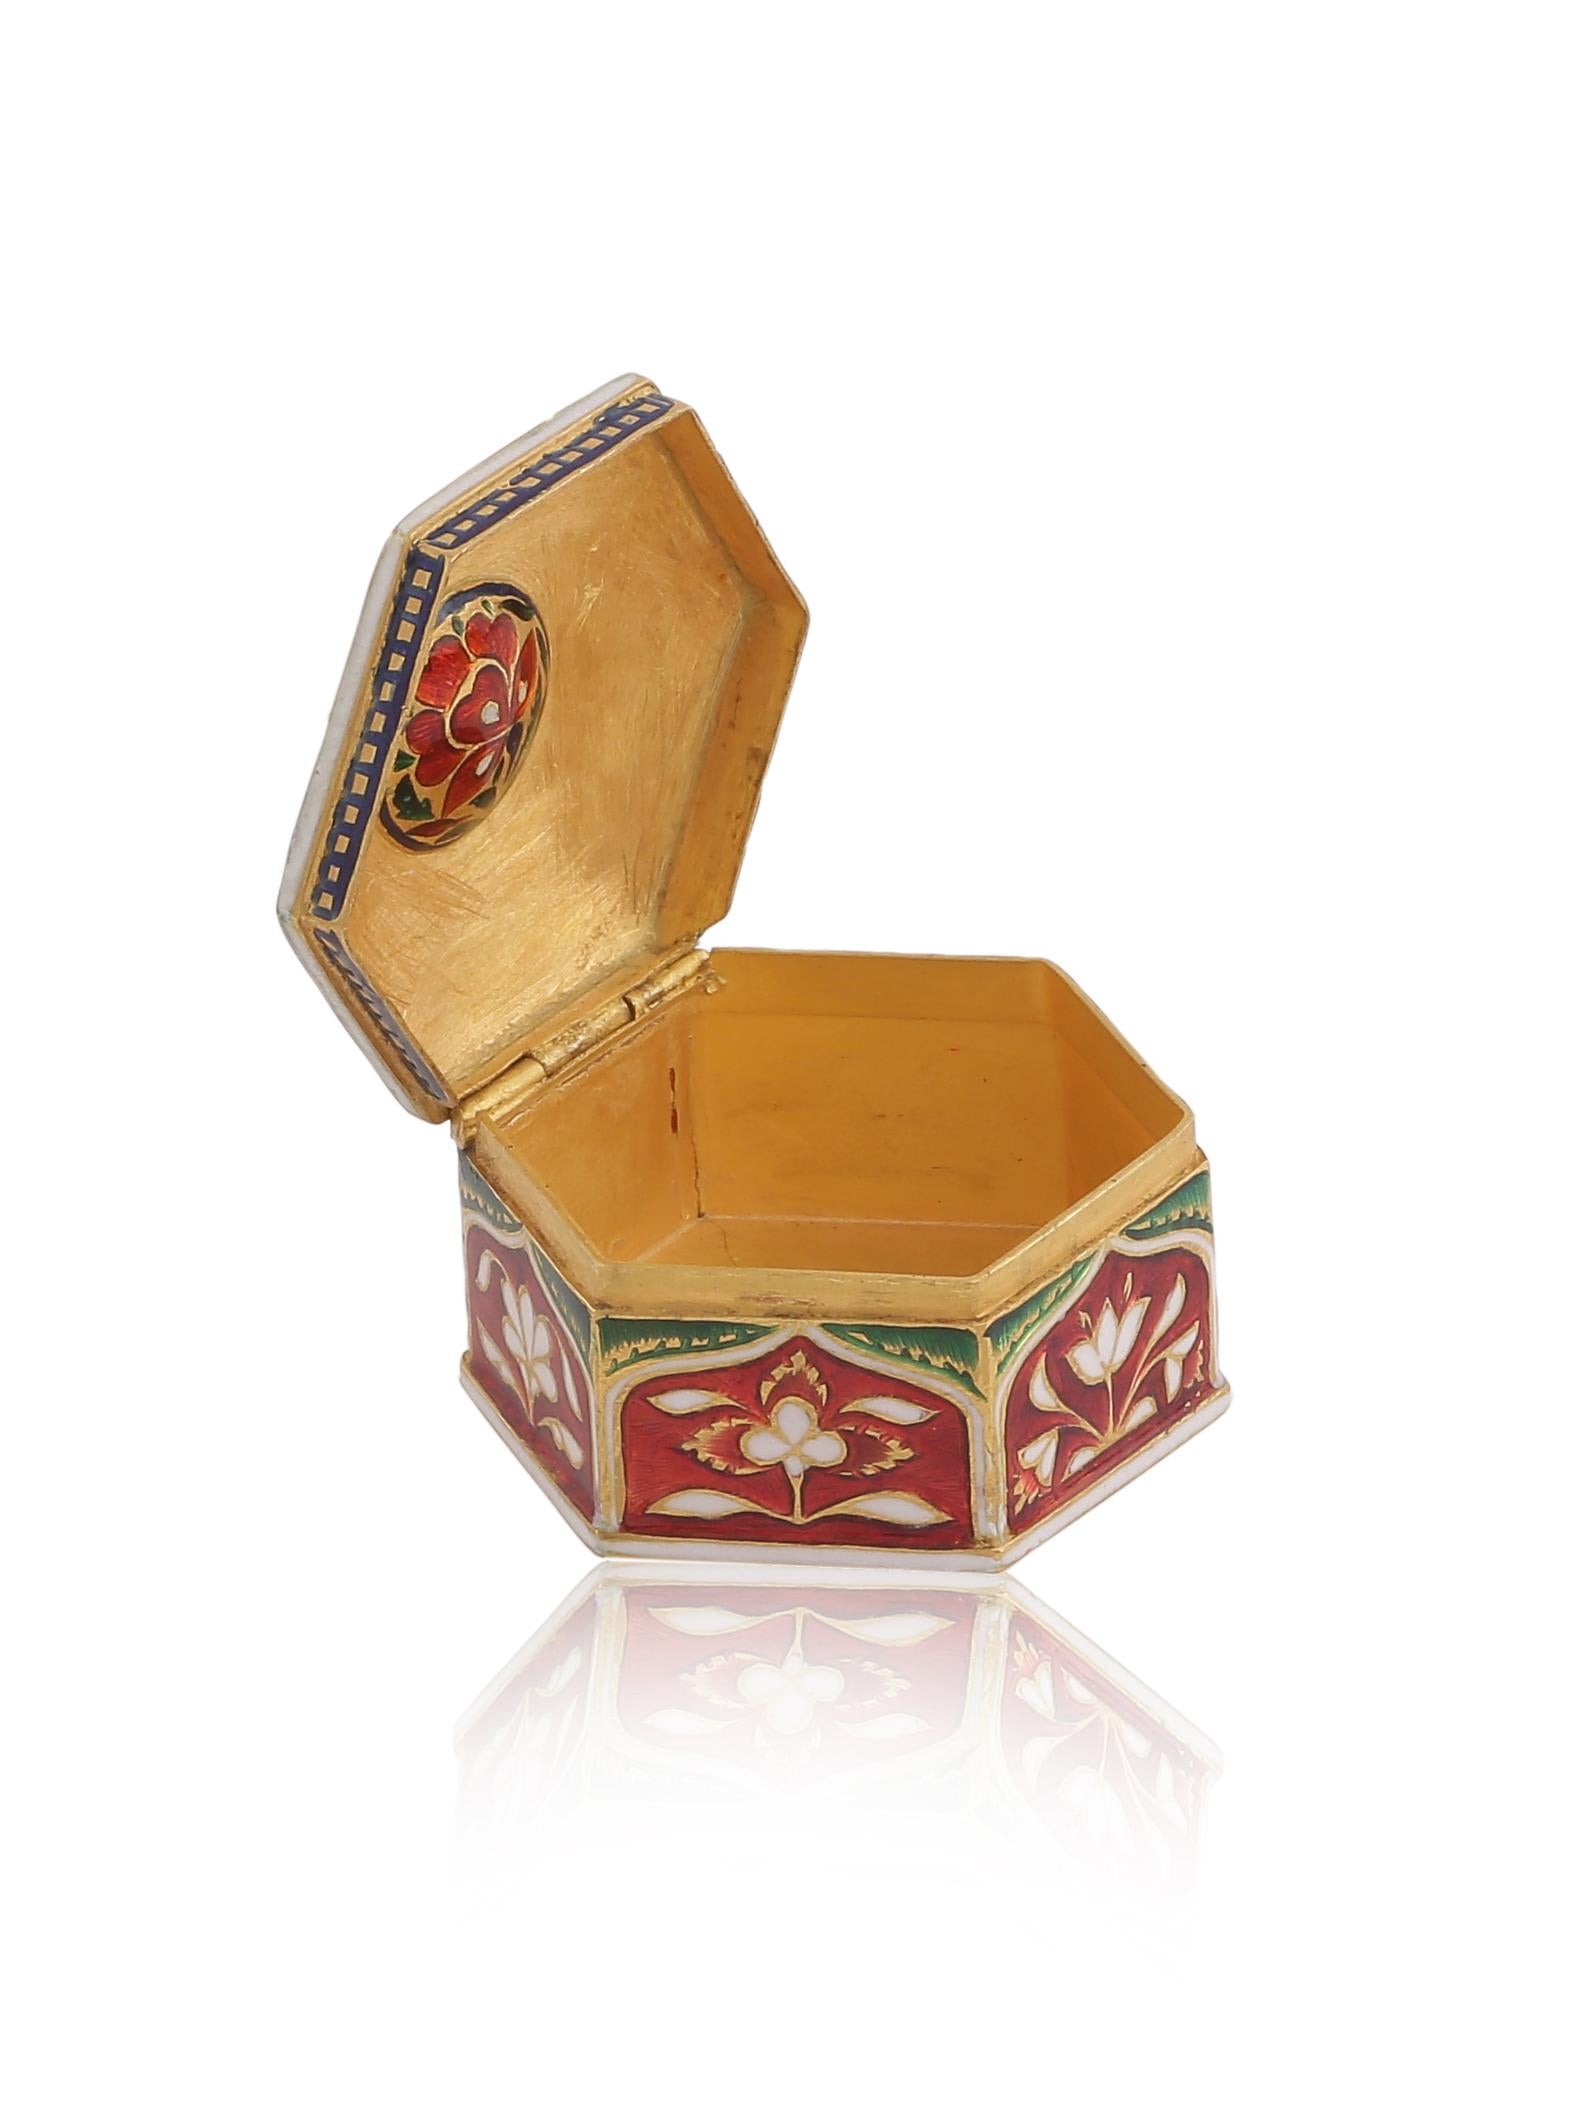 Rose Cut Enamel Box with Diamonds Handcrafted in 18 Karat Gold For Sale